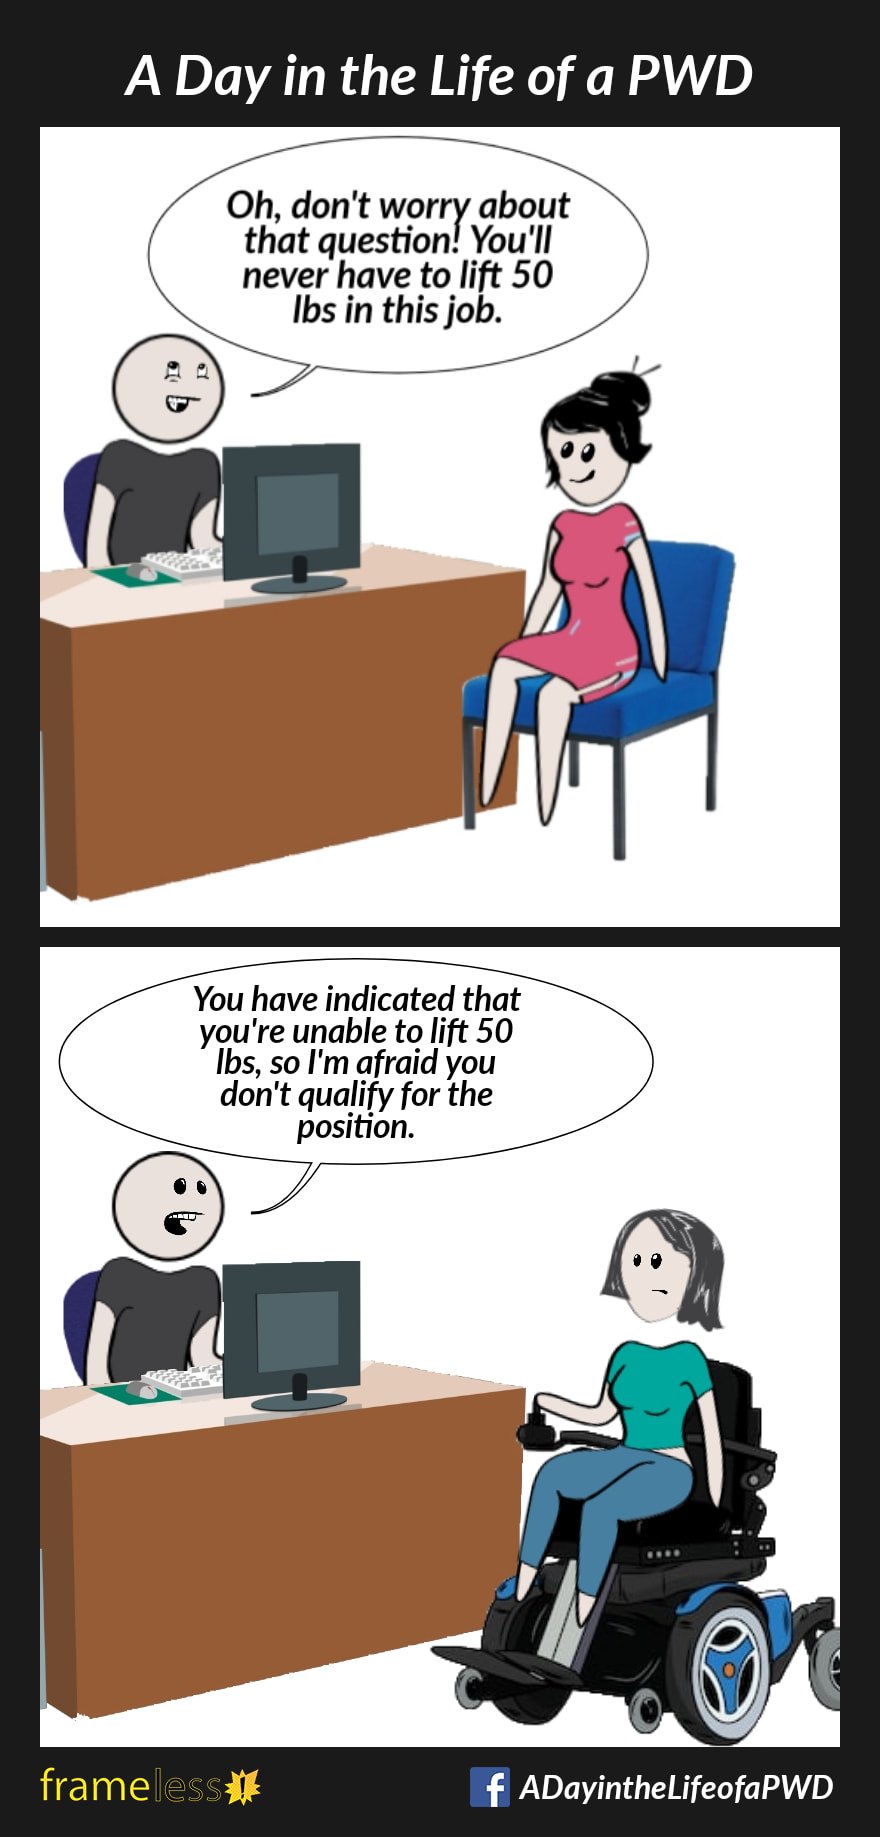 COMIC STRIP 
A Day in the Life of a PWD (Person With a Disability) 

Frame 1:
A woman is sitting in an office at job interview. 
INTERVIEWER: Oh, don't worry about that question! You'll never have to lift 50lbs in this job.

Frame 2:
A woman in a wheelchair is interviewing for the same job.
INTERVIEWER: You've indicated that you are unable to lift 50lbs, so I'm afraid you don't qualify for the position. 